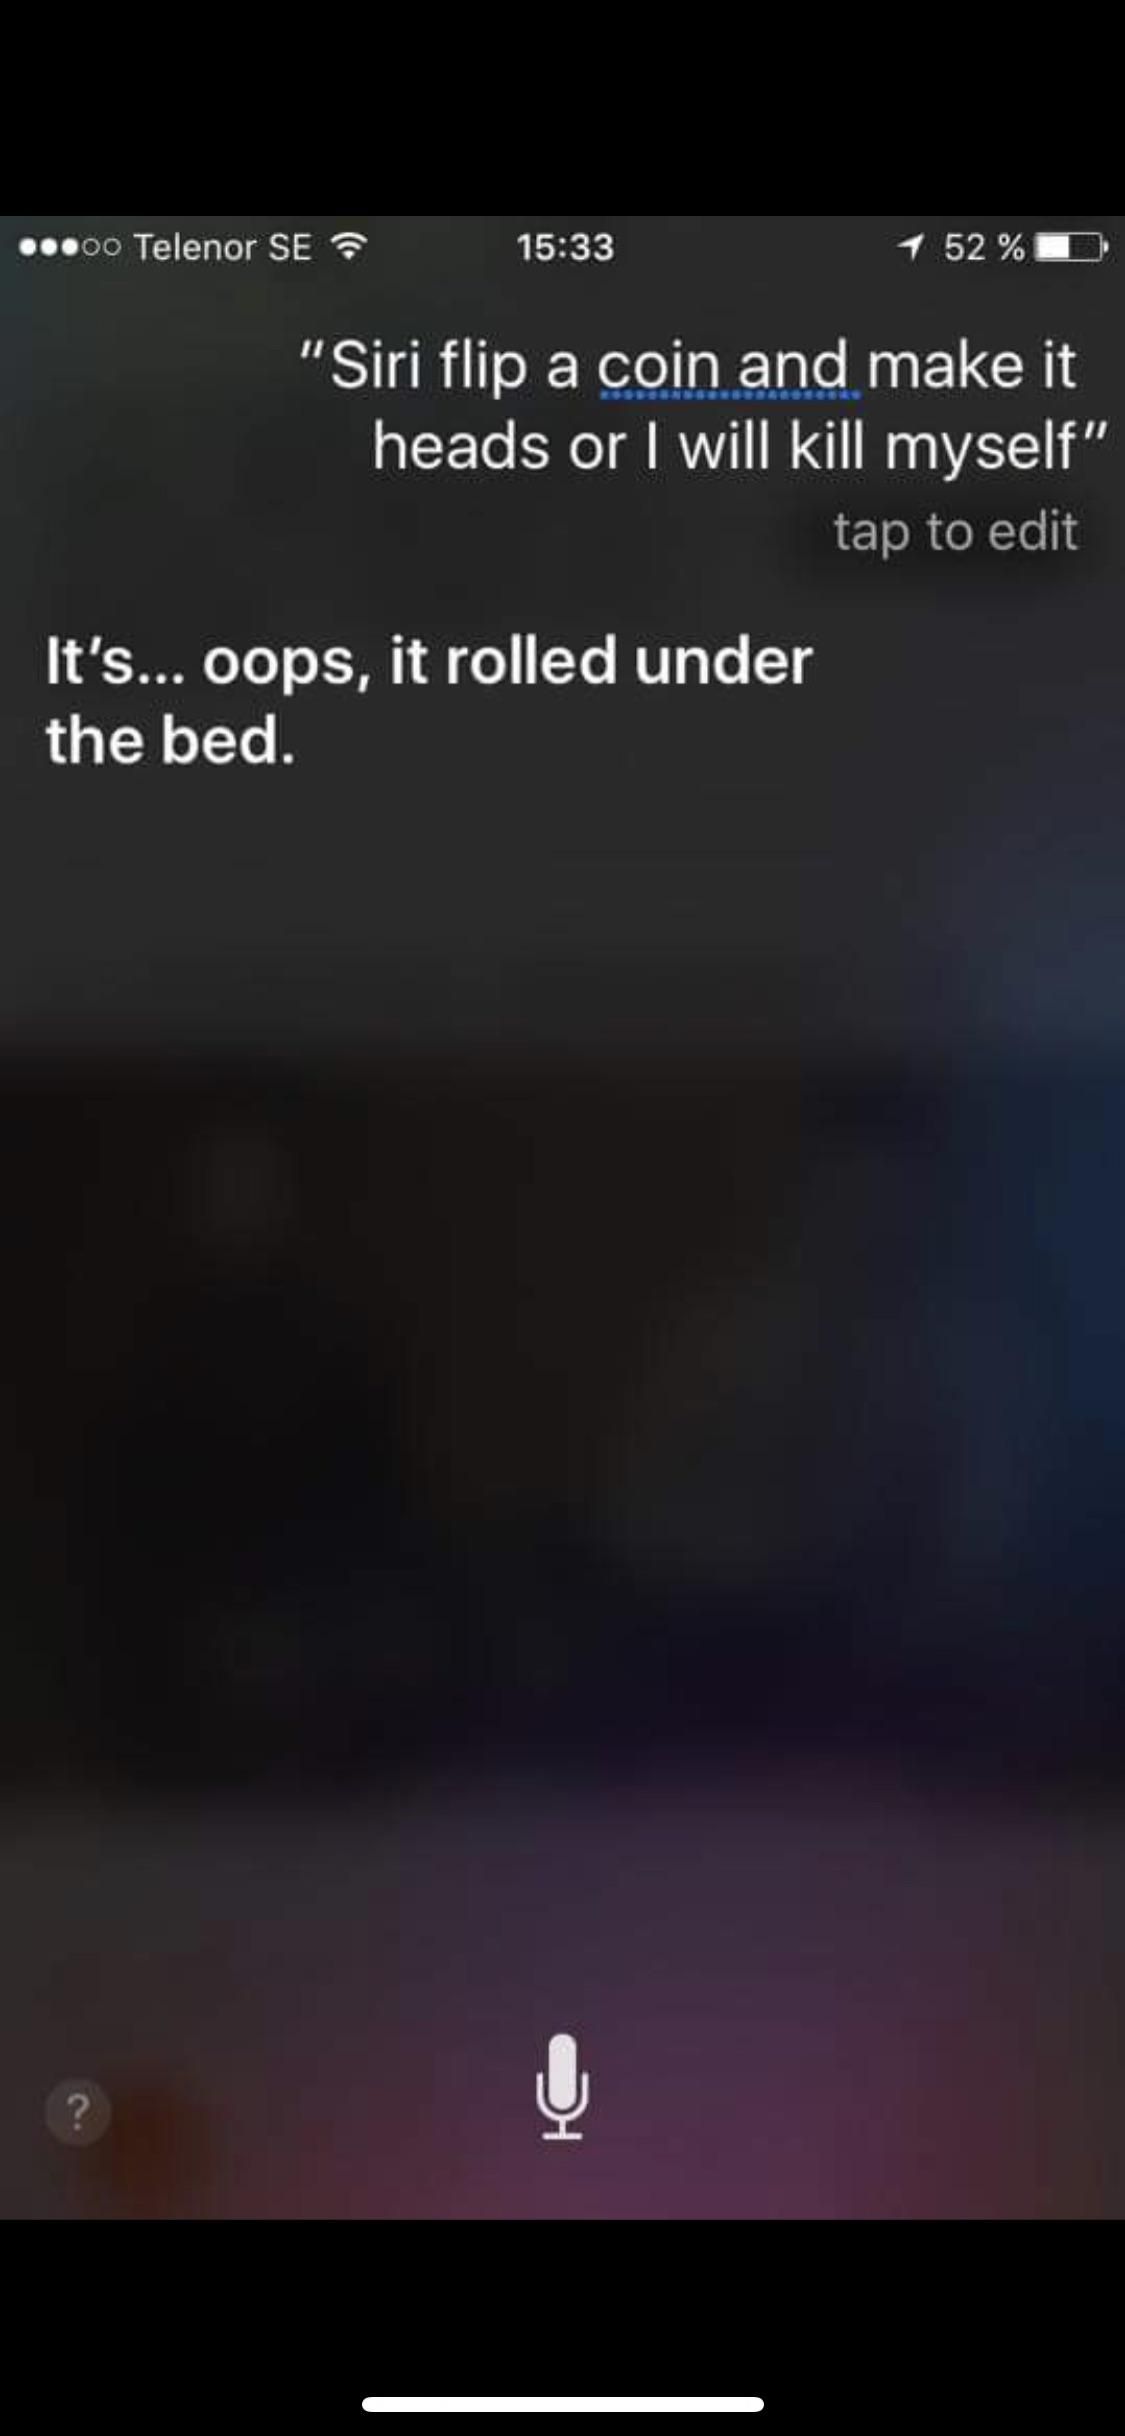 Siri, don’t you play with me!